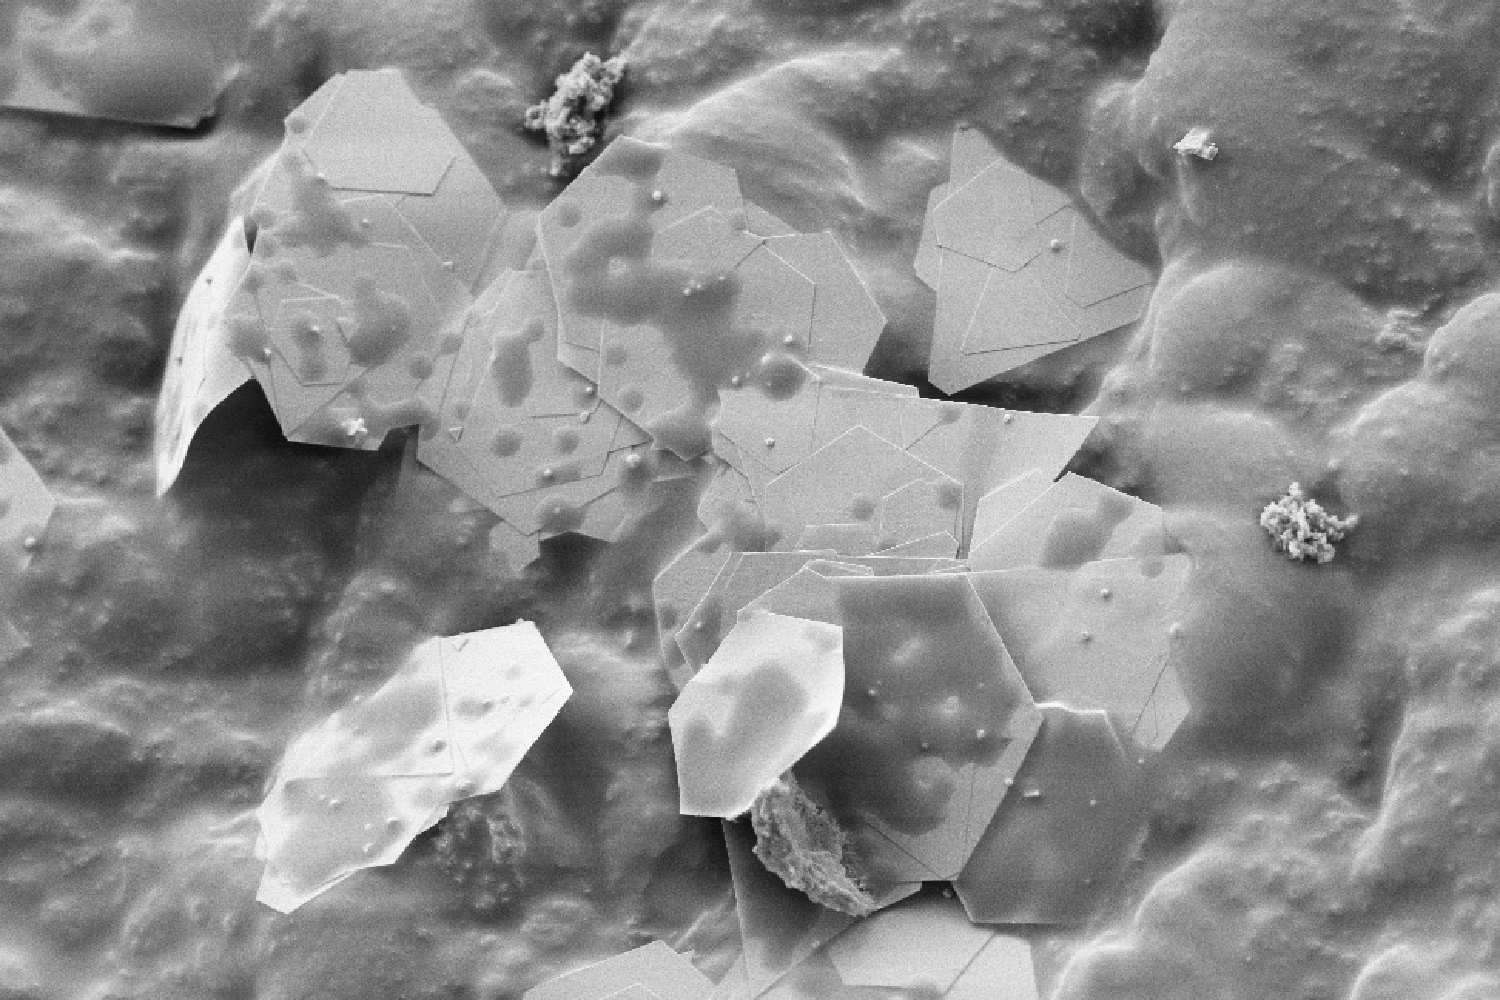 The nanoplatlets look like thin sheets of broken and cracked rocks under the microscope